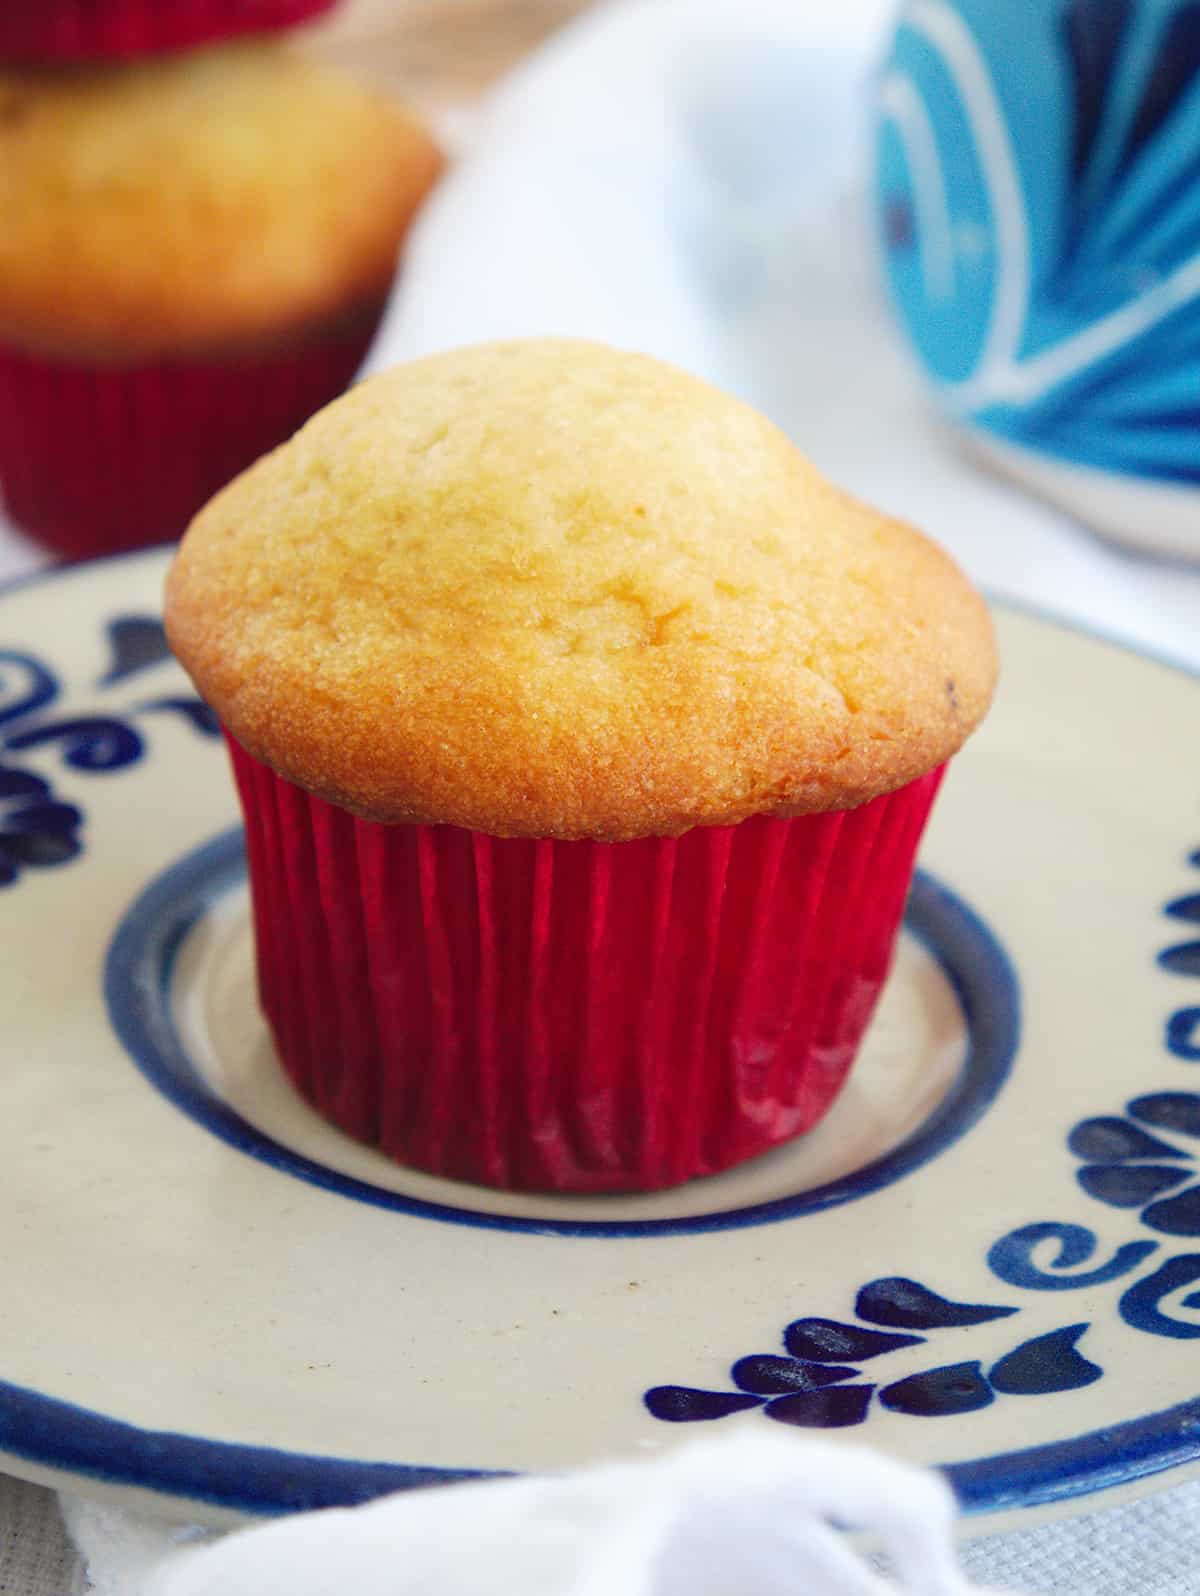 A single Mexican muffin with a red cupcake liner sitting on a decorative blue plate.